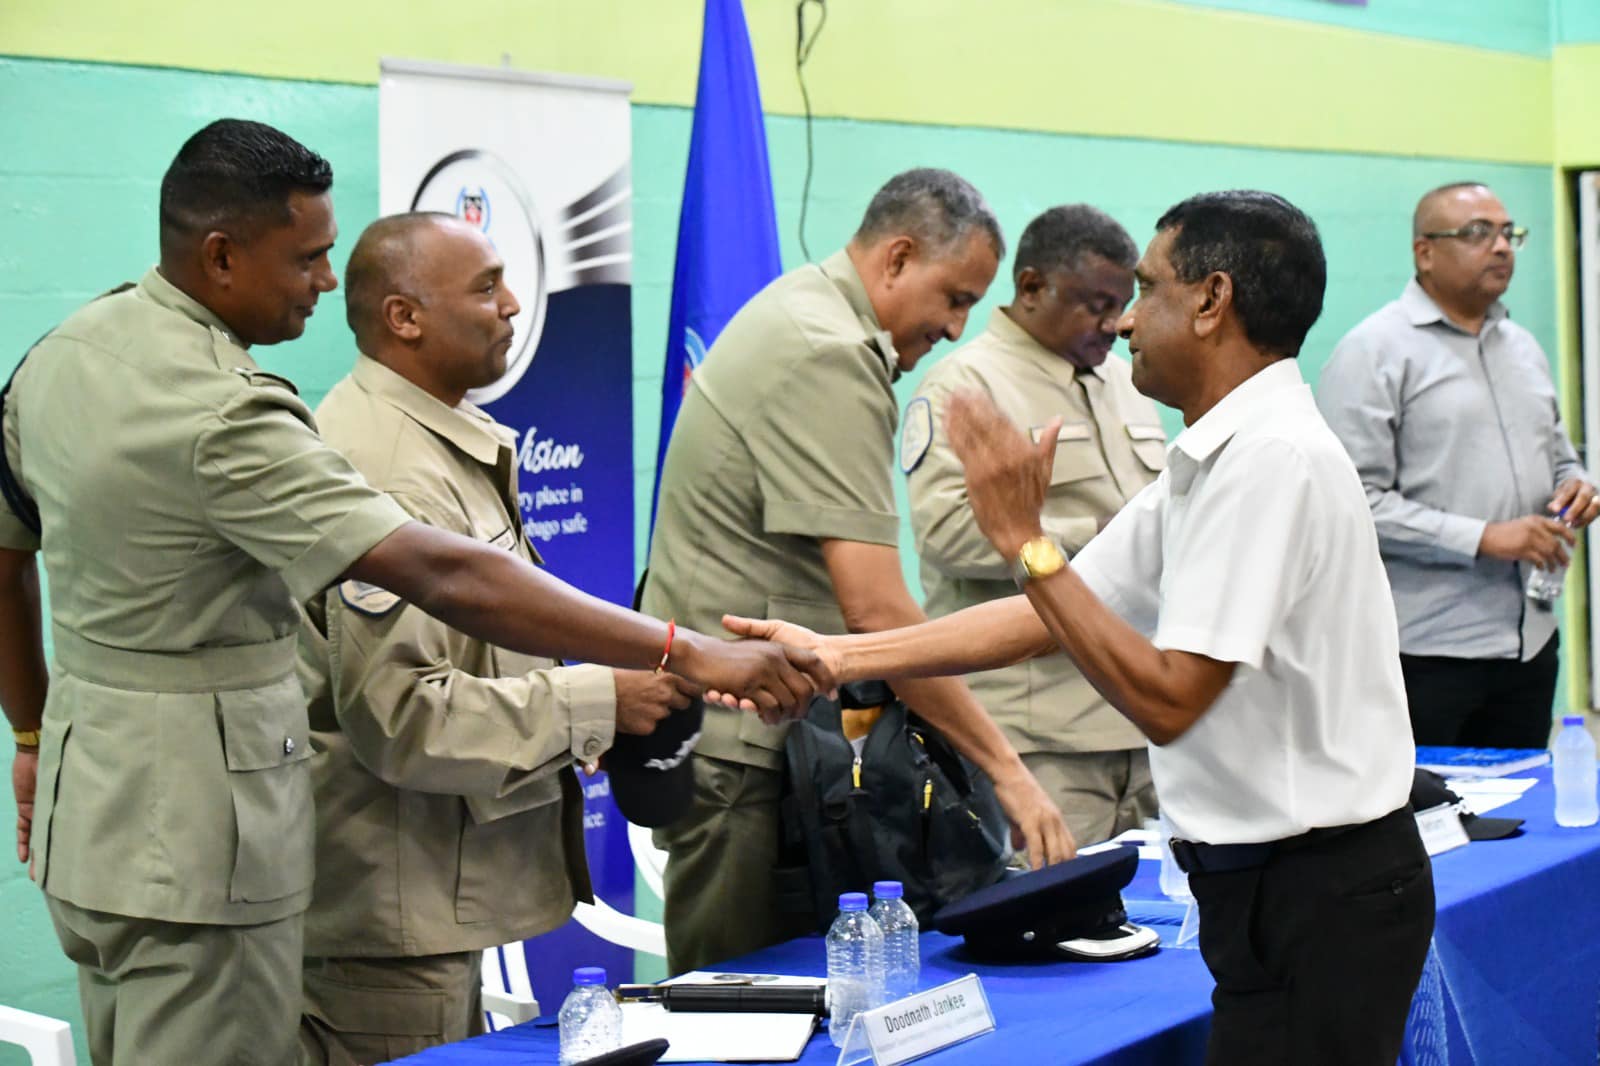 39% reduction in reported serious crimes in Rio Claro